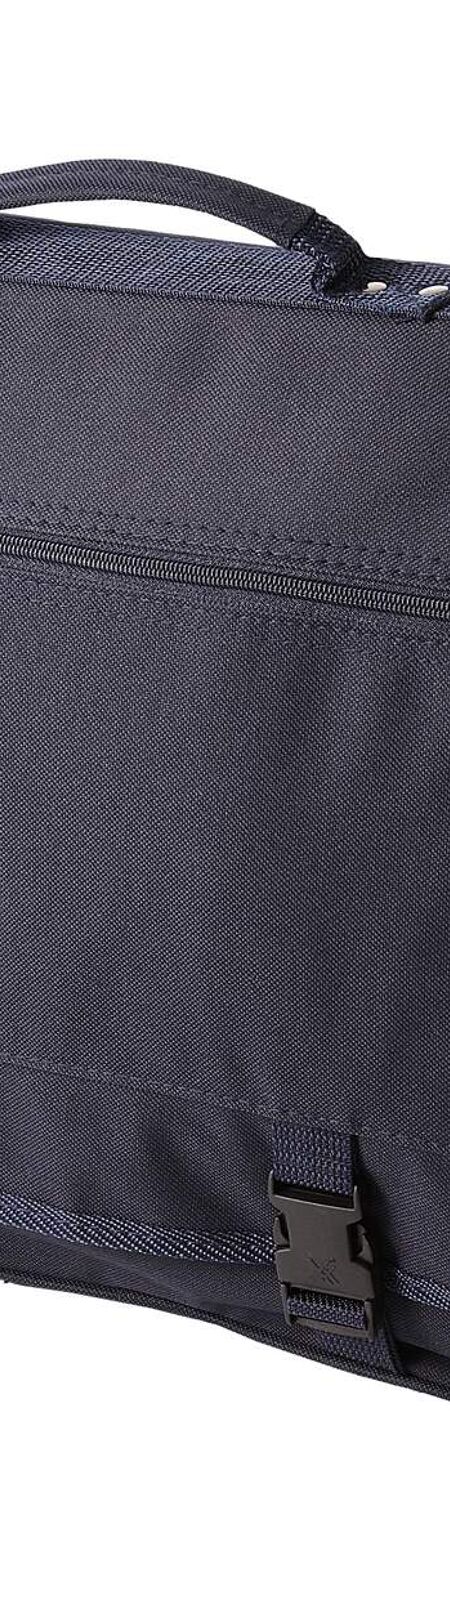 Bullet Anchorage Conference Bag (Pack of 2) (Navy) (15.7 x 3.9 x 13 inches) - UTPF2538